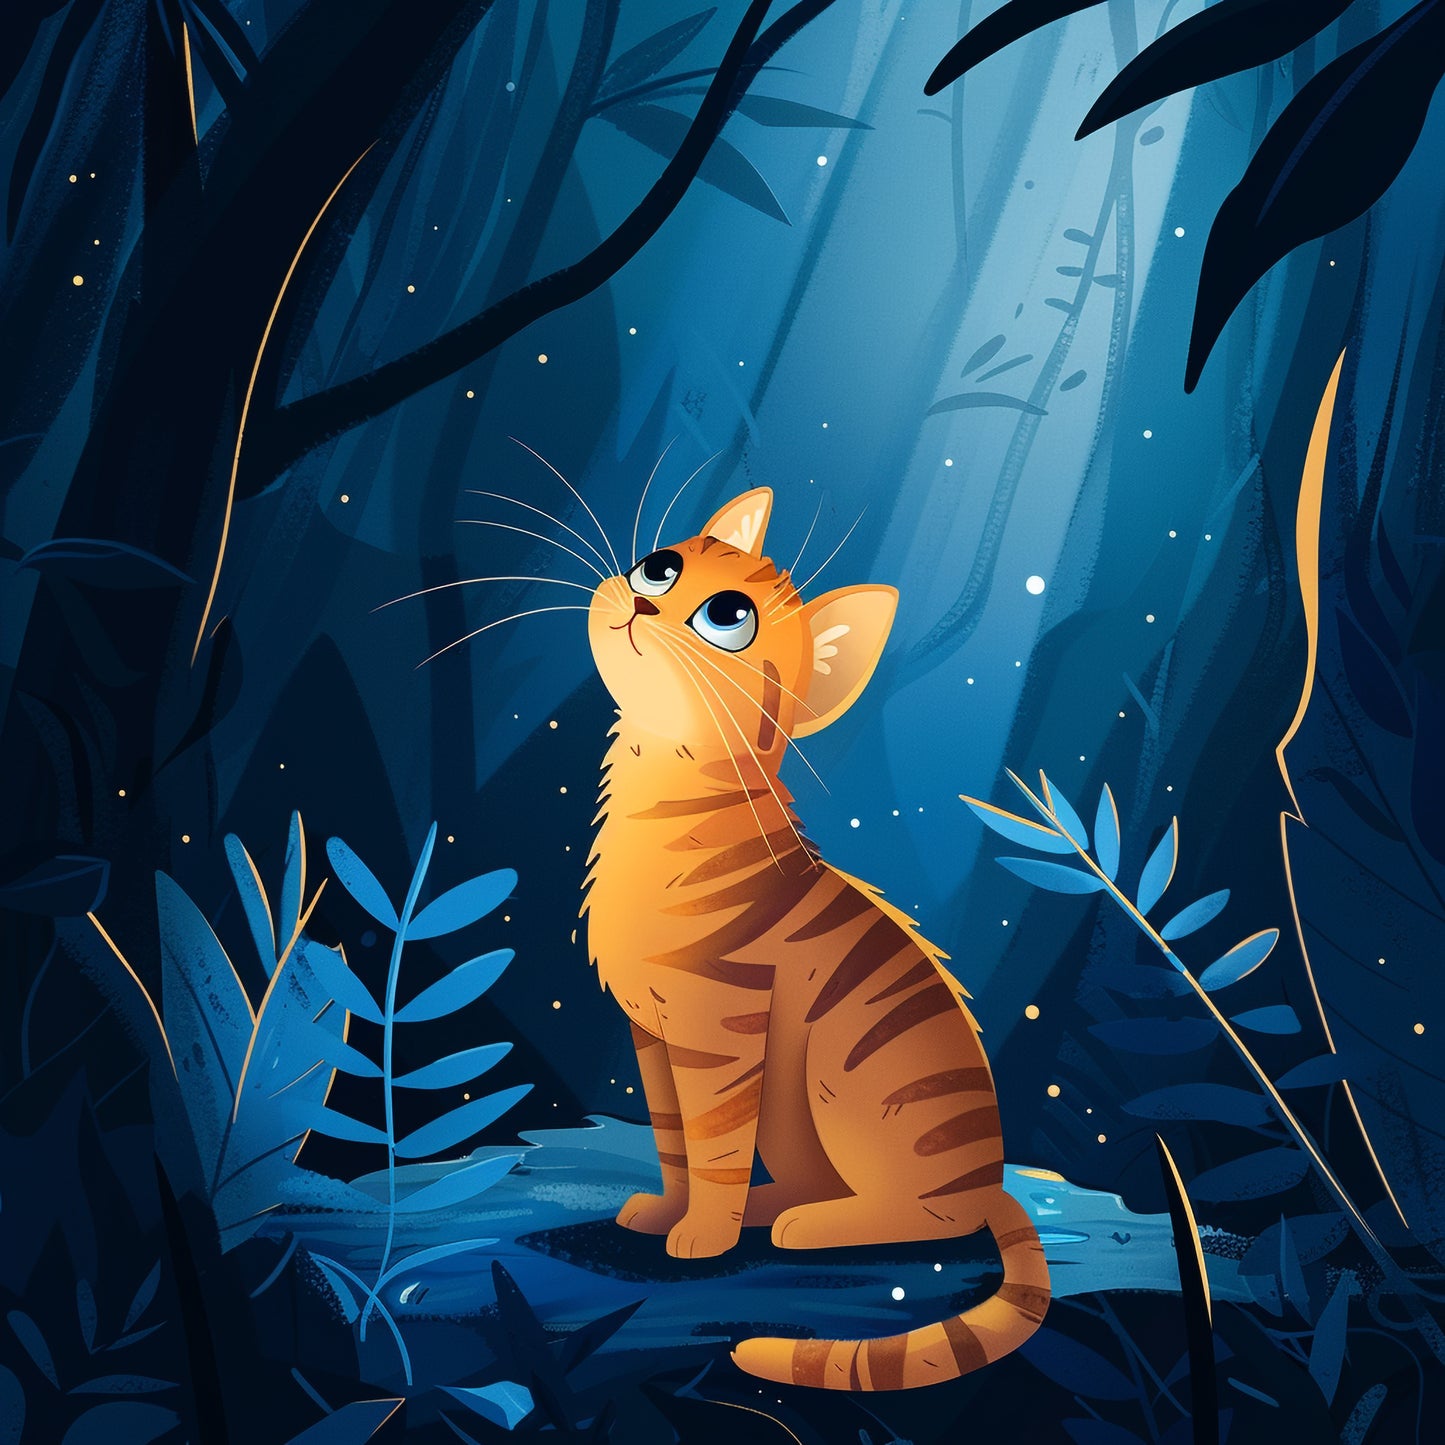 Adorable Cat Illustration in Enchanted Forest with Dreamy Lighting